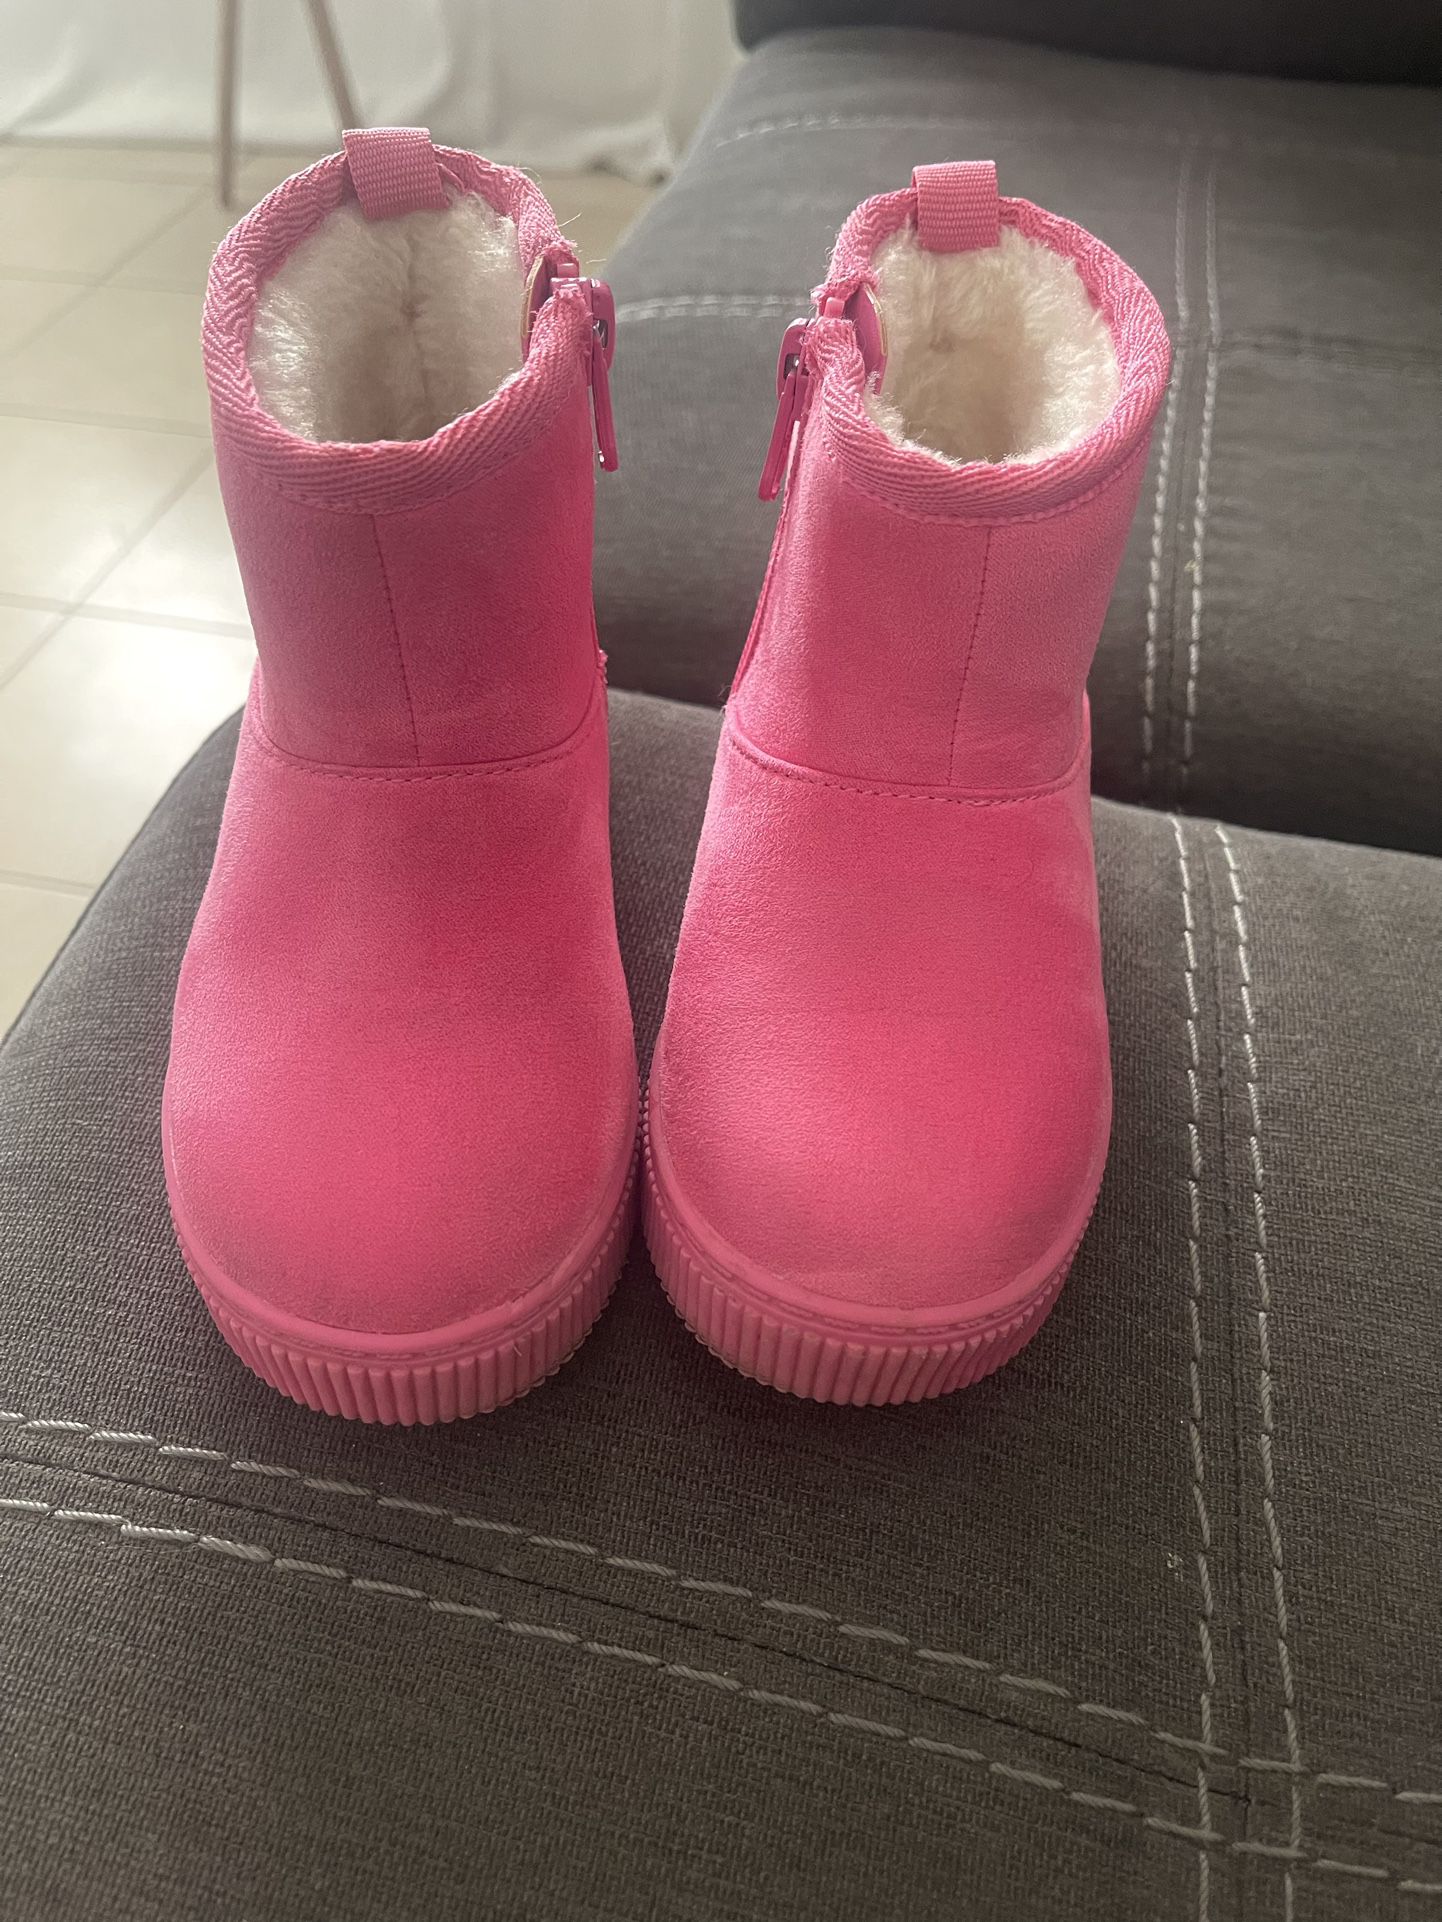 Toddler Pink Winter Boots